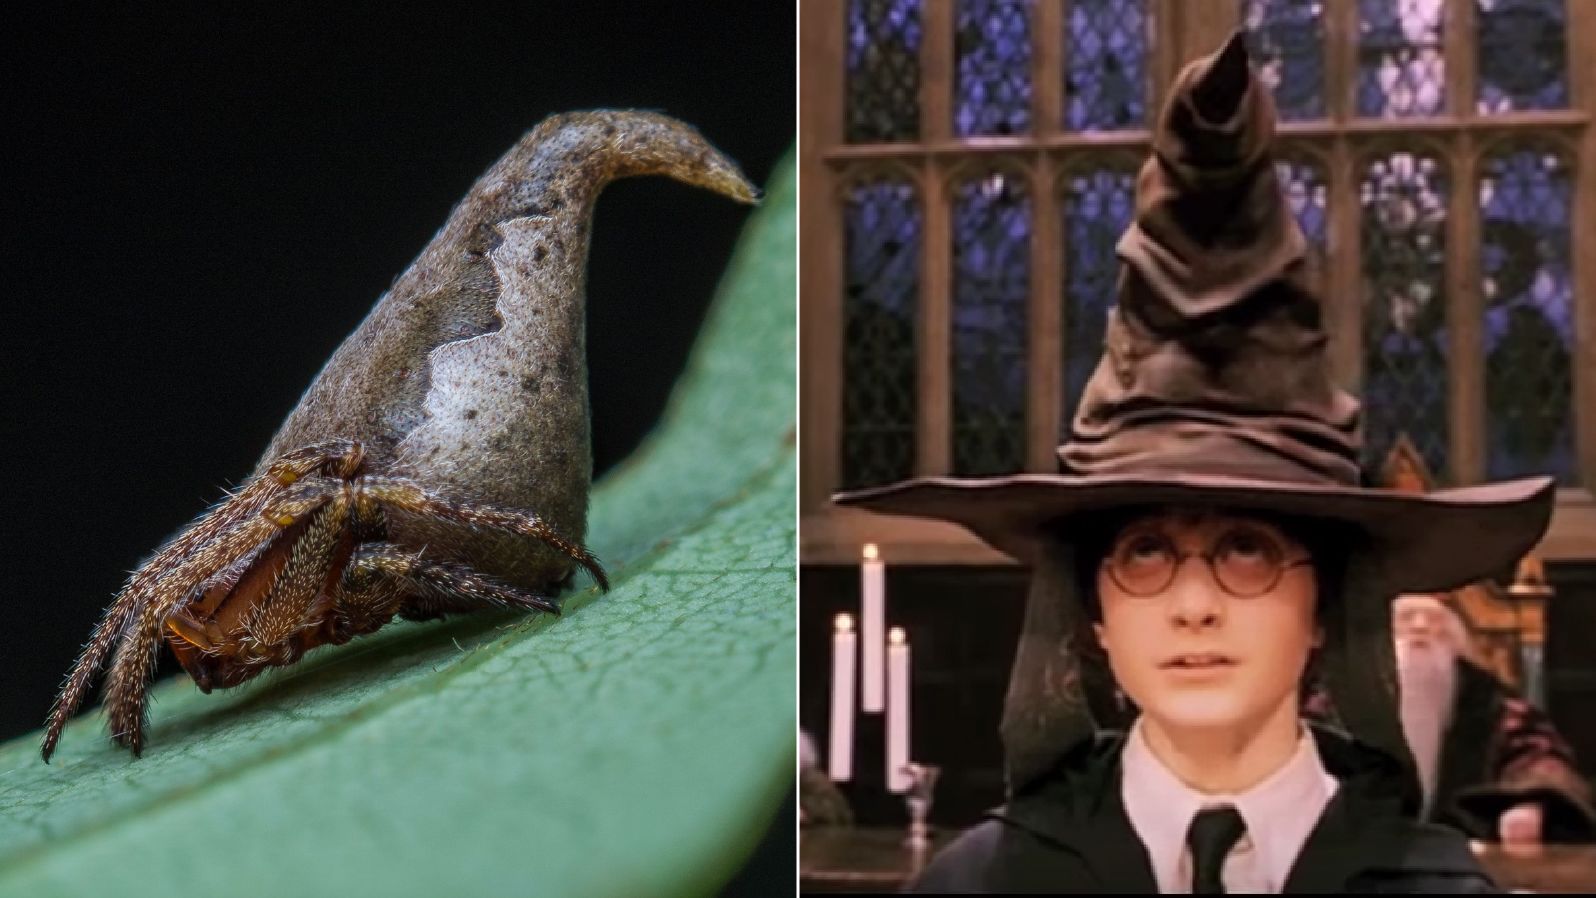 The scientists compared the newly-discovered spider to Harry Potter's sorting hat.
